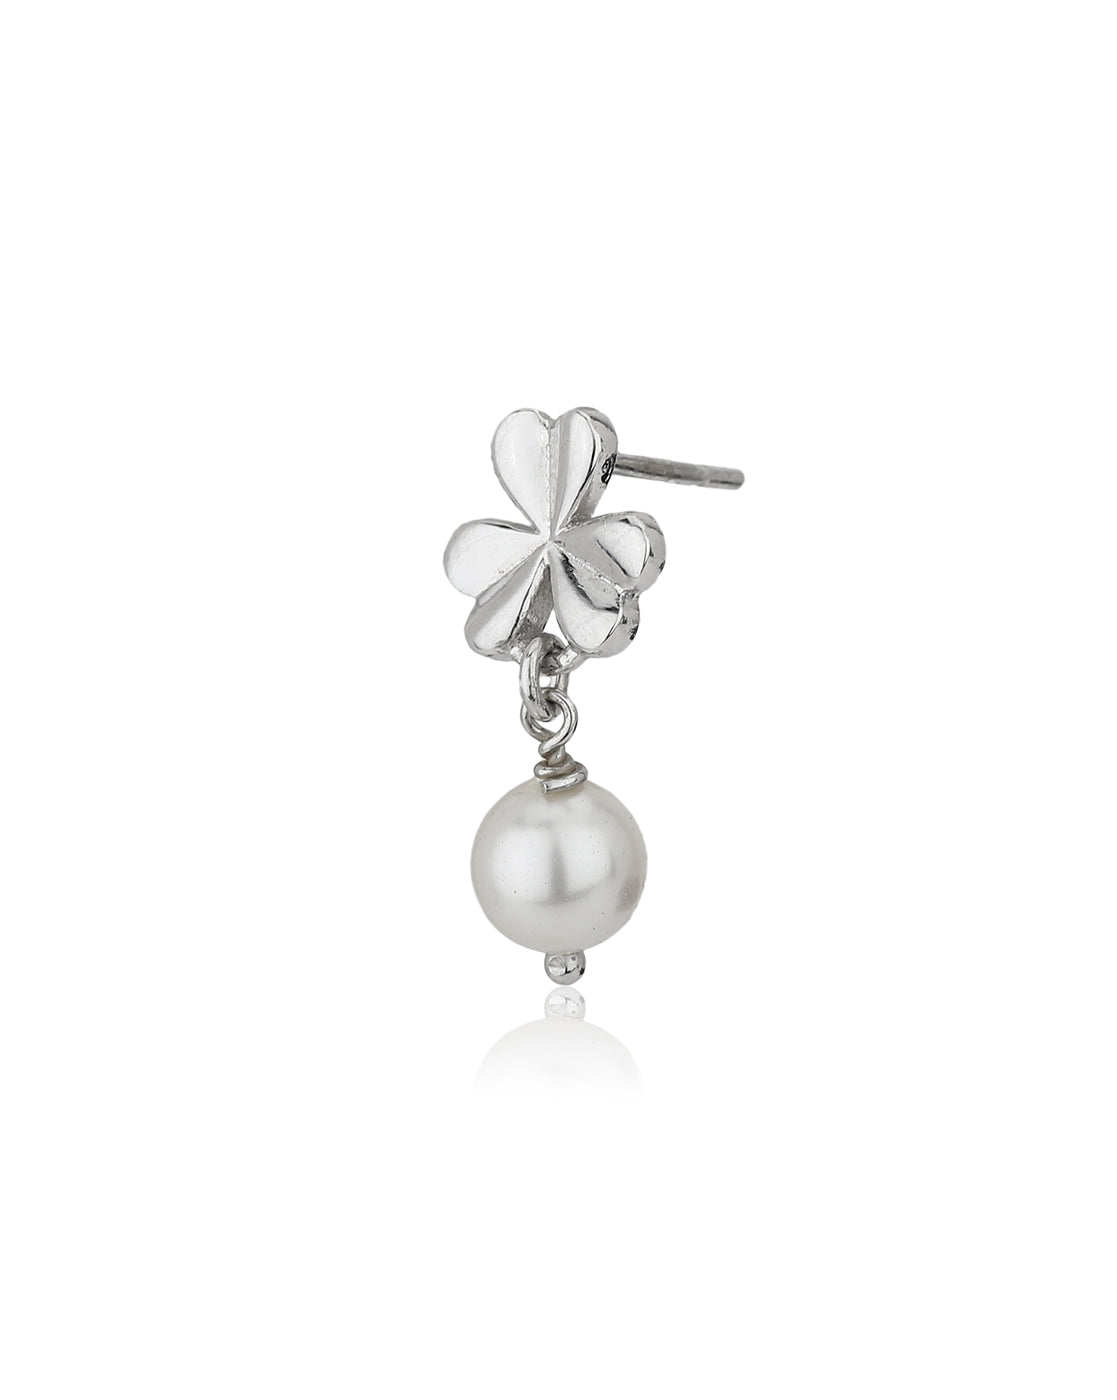 Carlton London 925 Sterling Silver Rhodium Plated White Pearl Floral Drop Earring